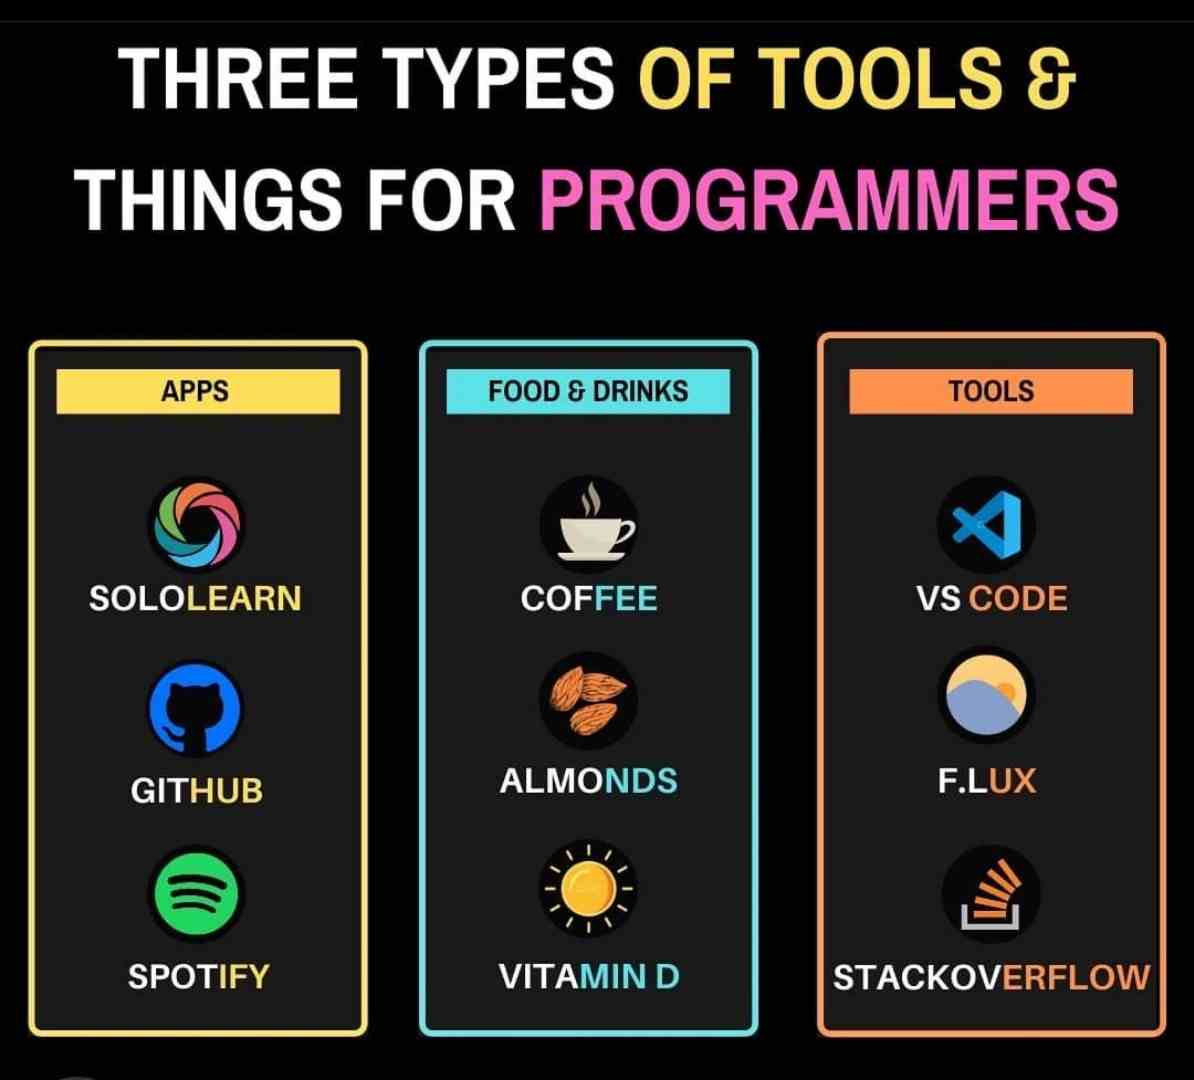 Three types of tools & things for Programmers